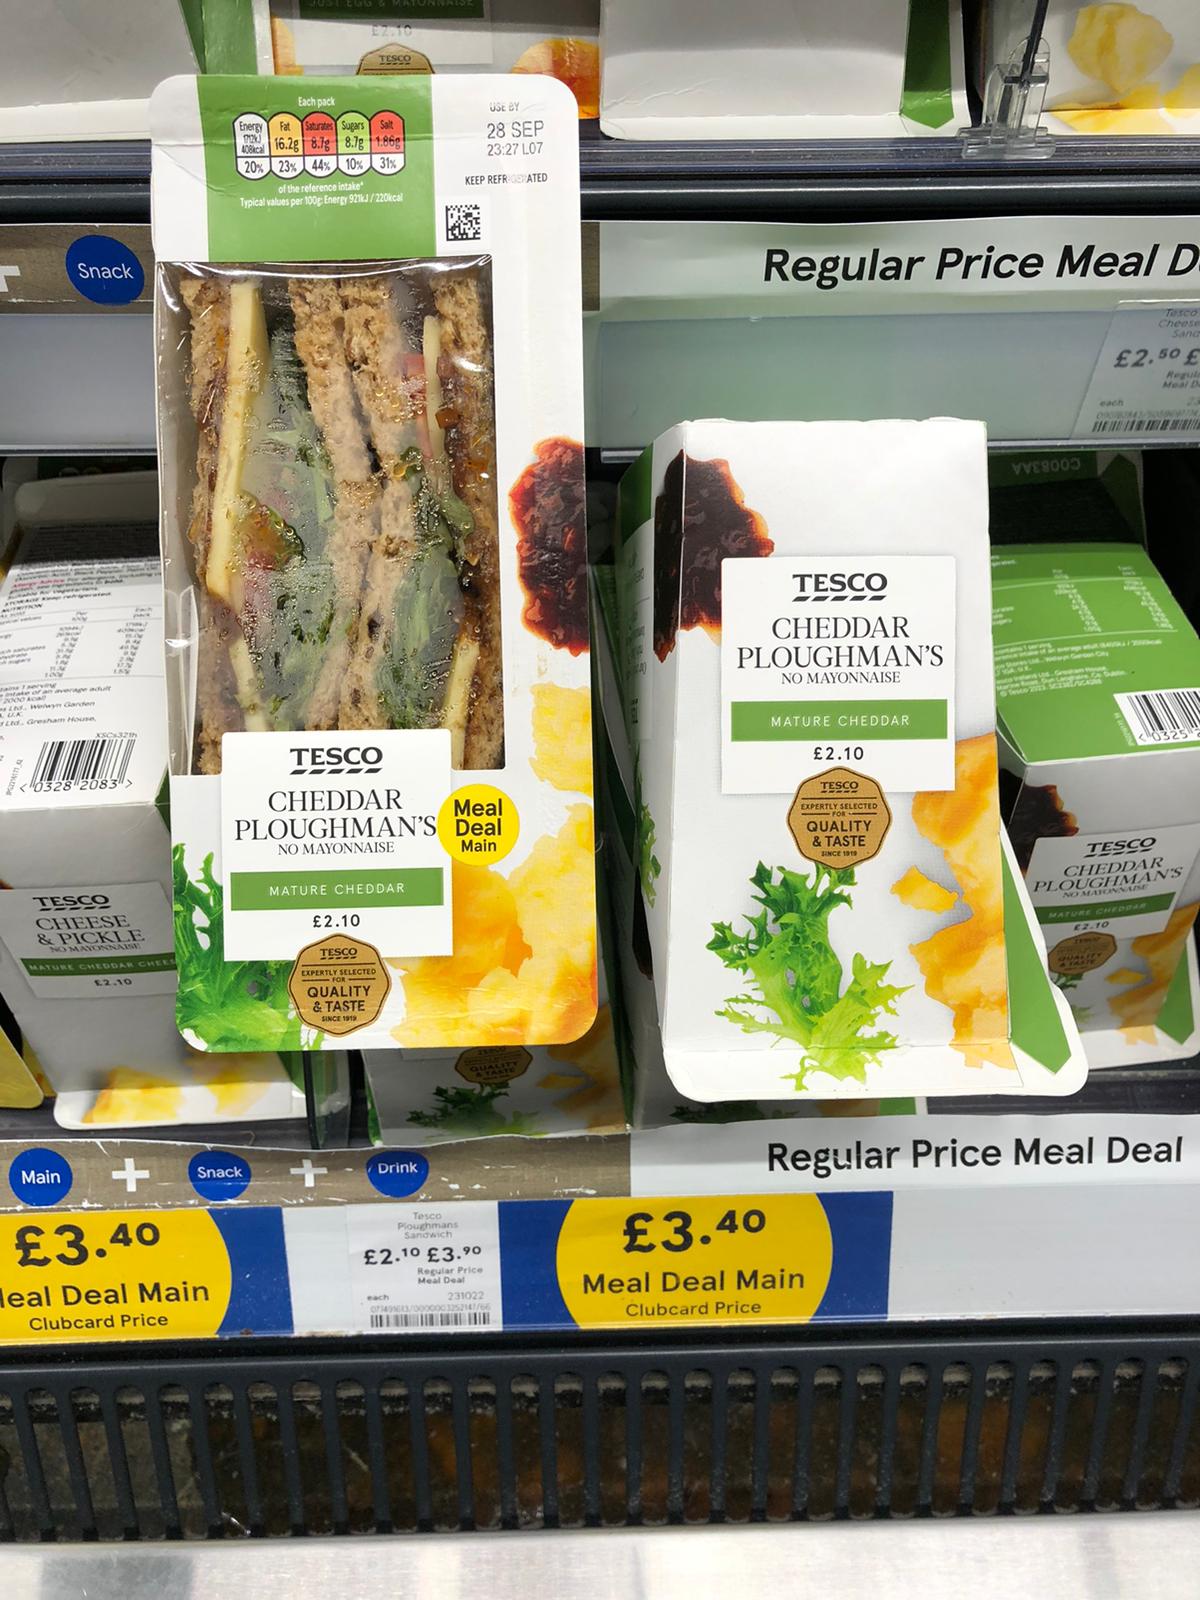 A ploughman’s sandwich costs £2.10 at Tesco or £3.90 as part of a meal deal including snack and drink without a clubcard